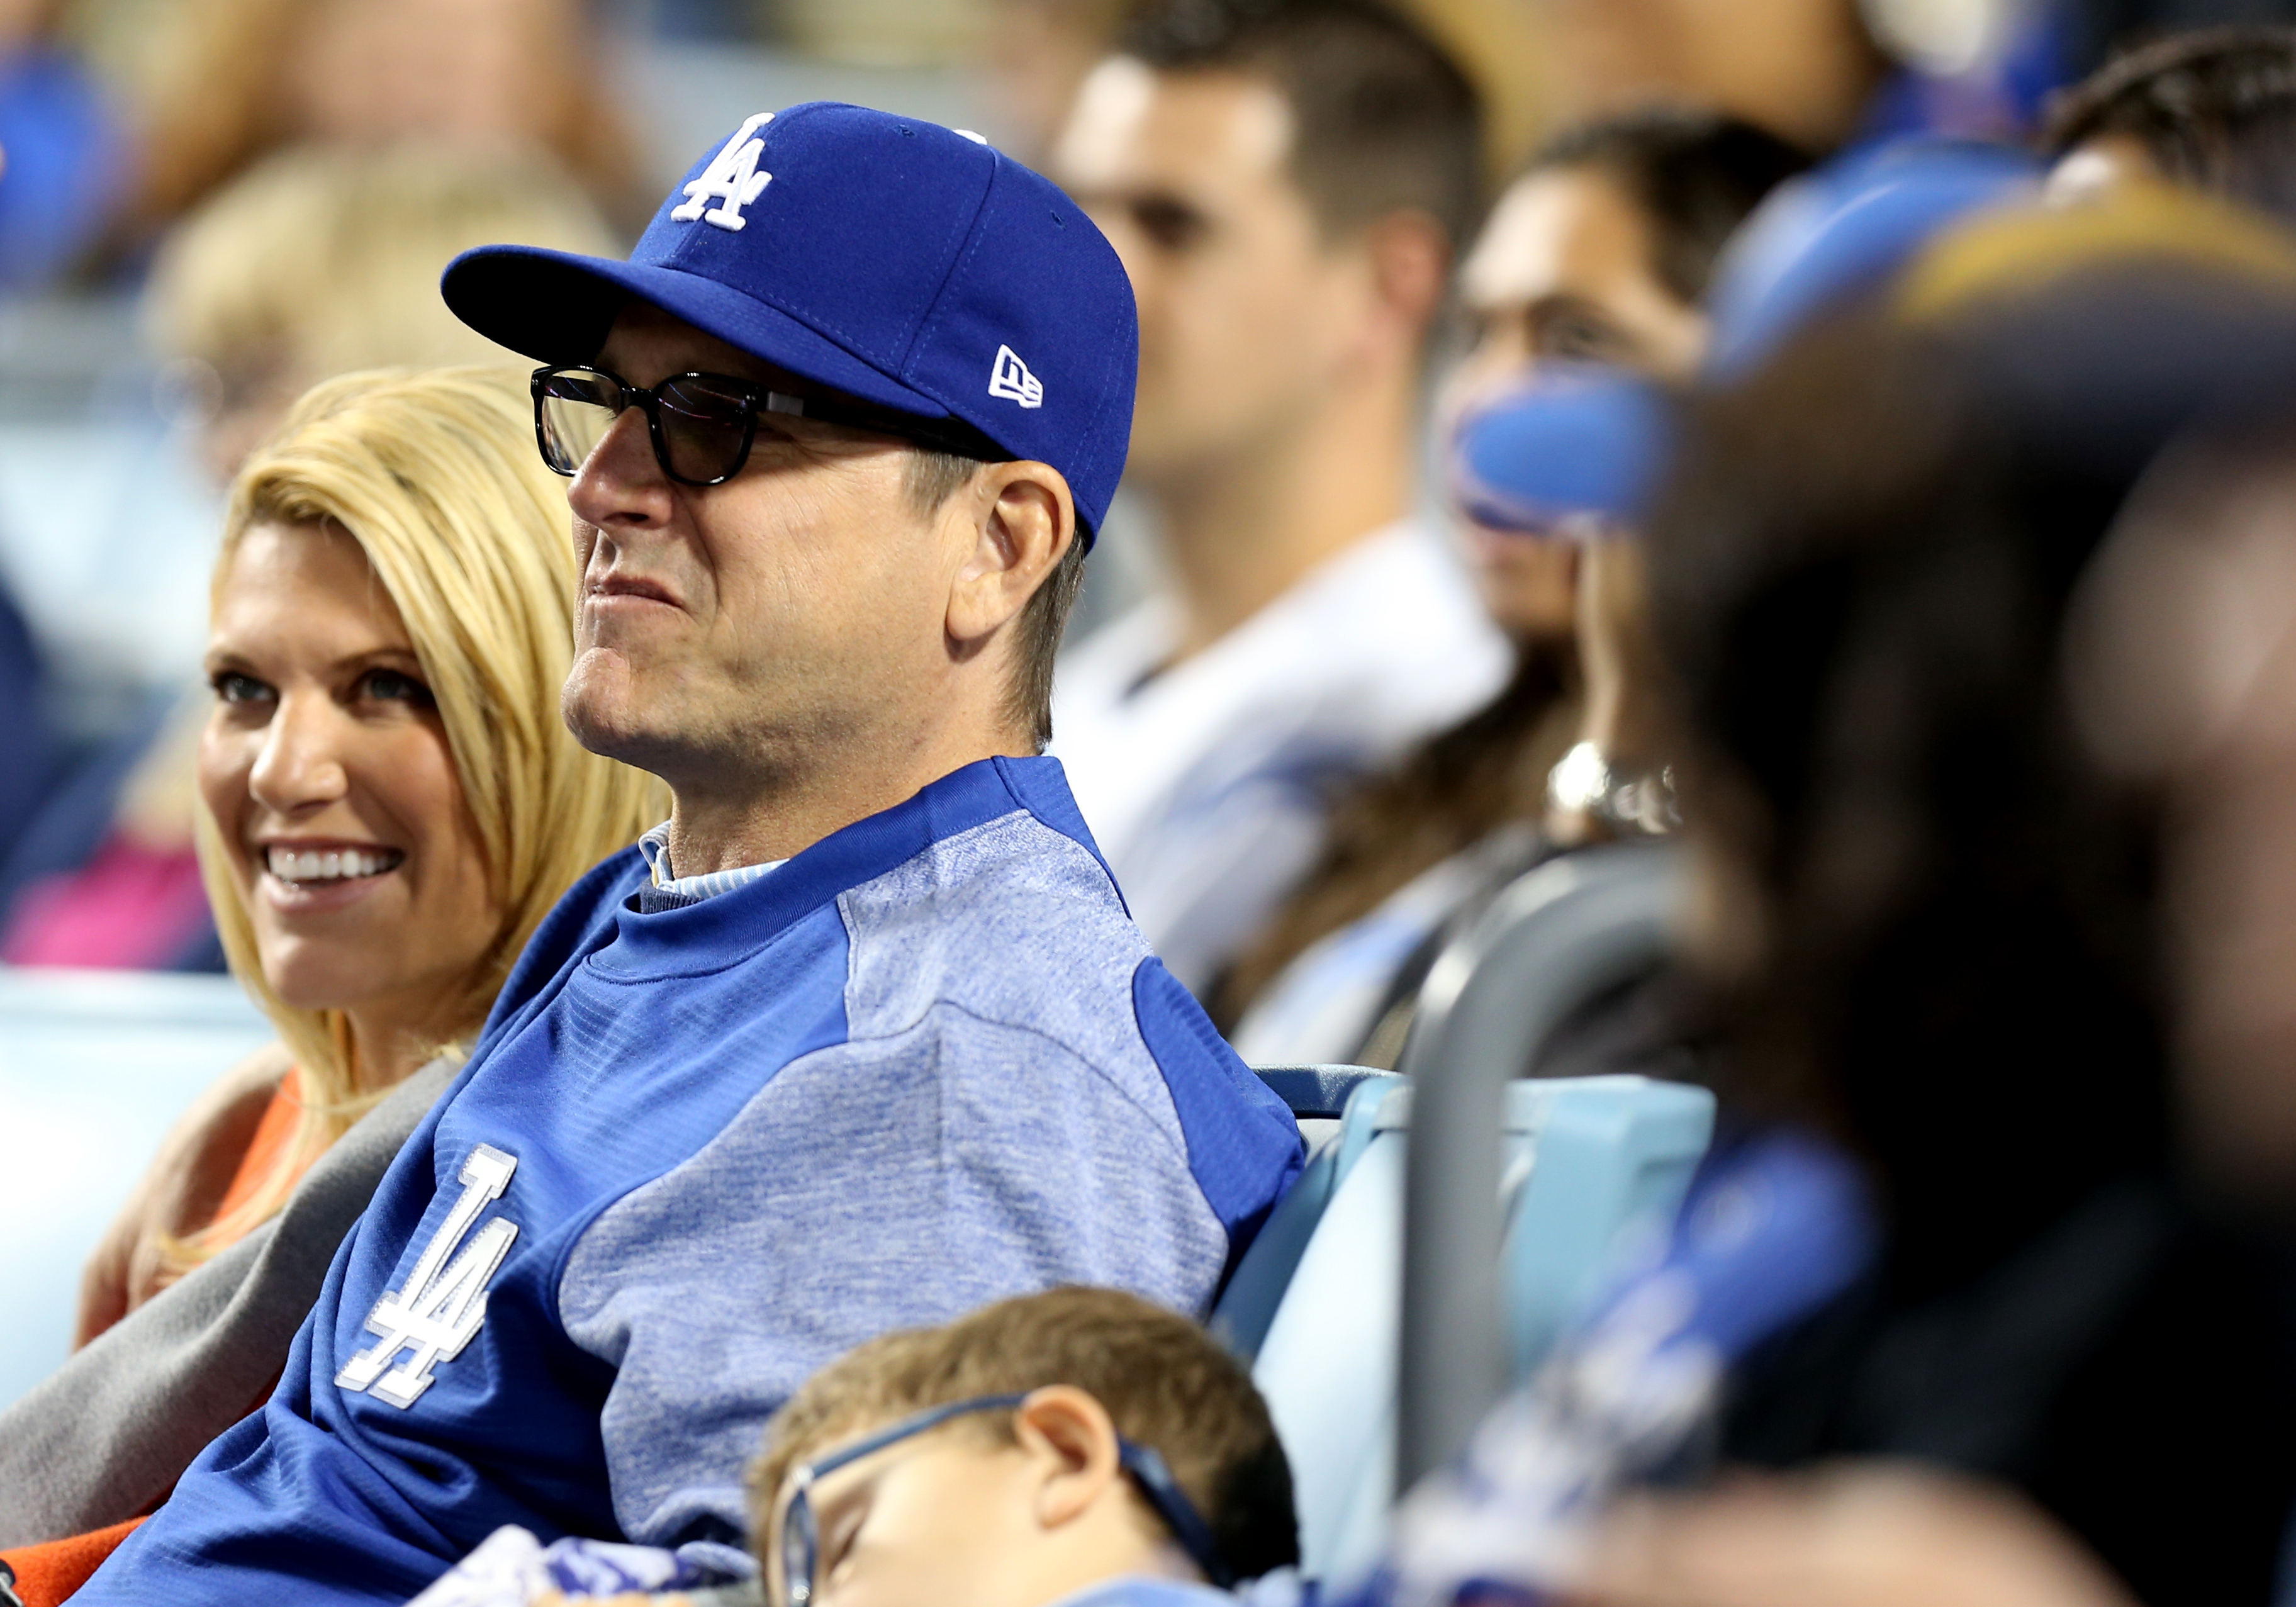 Sarah Feuerborn Harbaugh and Jim Harbaugh enjoy the Dodgers game on May 8, 2017, at Dodger Stadium in Los Angeles, California | Source: Getty Images